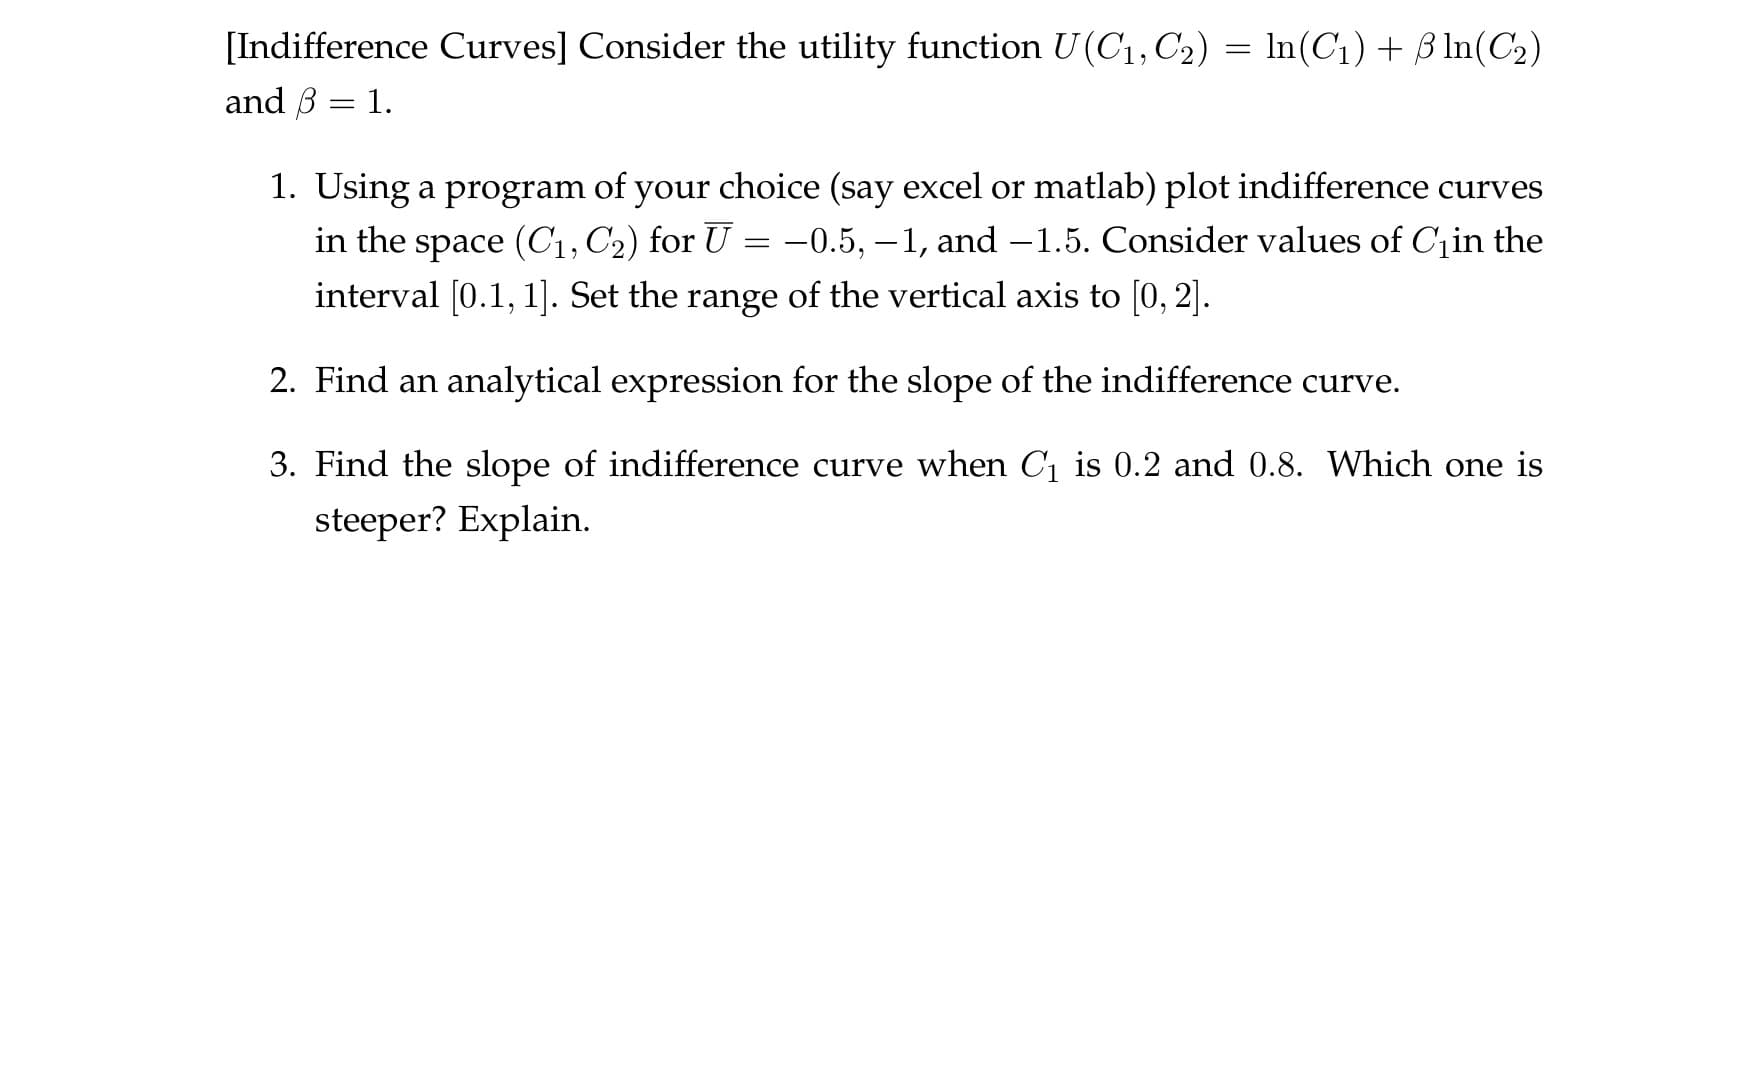 [Indifference Curves] Consider the utility function U(C1, C2)
and B 1
In(C1)BIn(C2)
1. Using a program of your choice (say excel or matlab) plot indifference curves
in the space (C1, C2) for U =-0.5, -1, and -1.5. Consider values of Cin the
interval [0.1, 1]. Set the range of the vertical axis to [0, 2].
2. Find an analytical expression for the slope of the indifference curve
3. Find the slope of indifference curve when C1 is 0.2 and 0.8. Which one is
steeper? Explain
